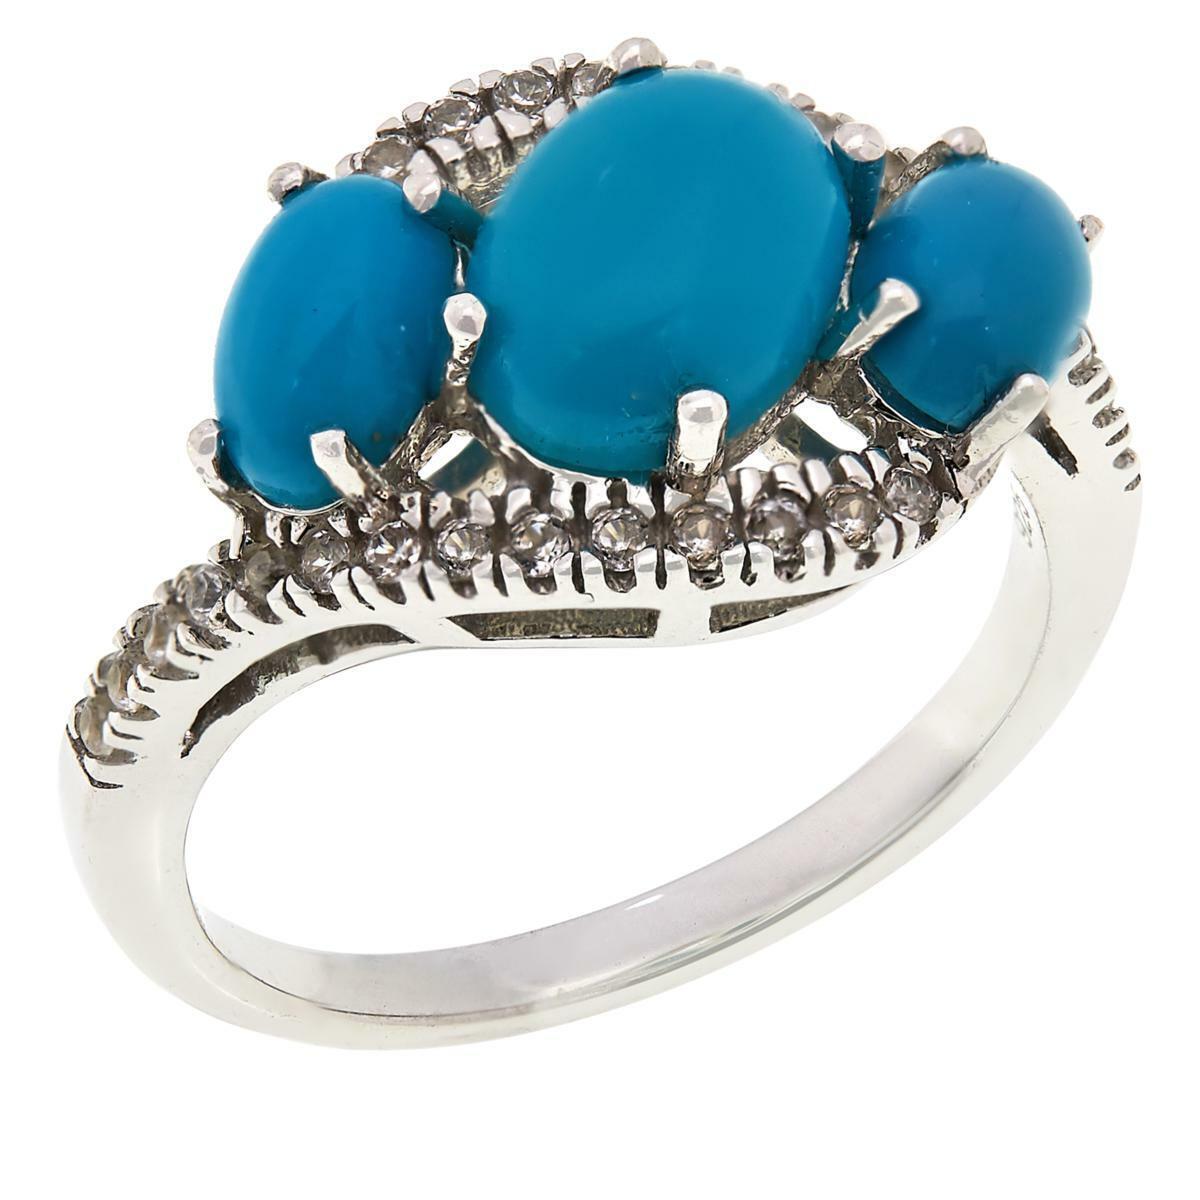 Colleen Lopez Sterling Silver Turquoise and White Zircon Ring, Size 5